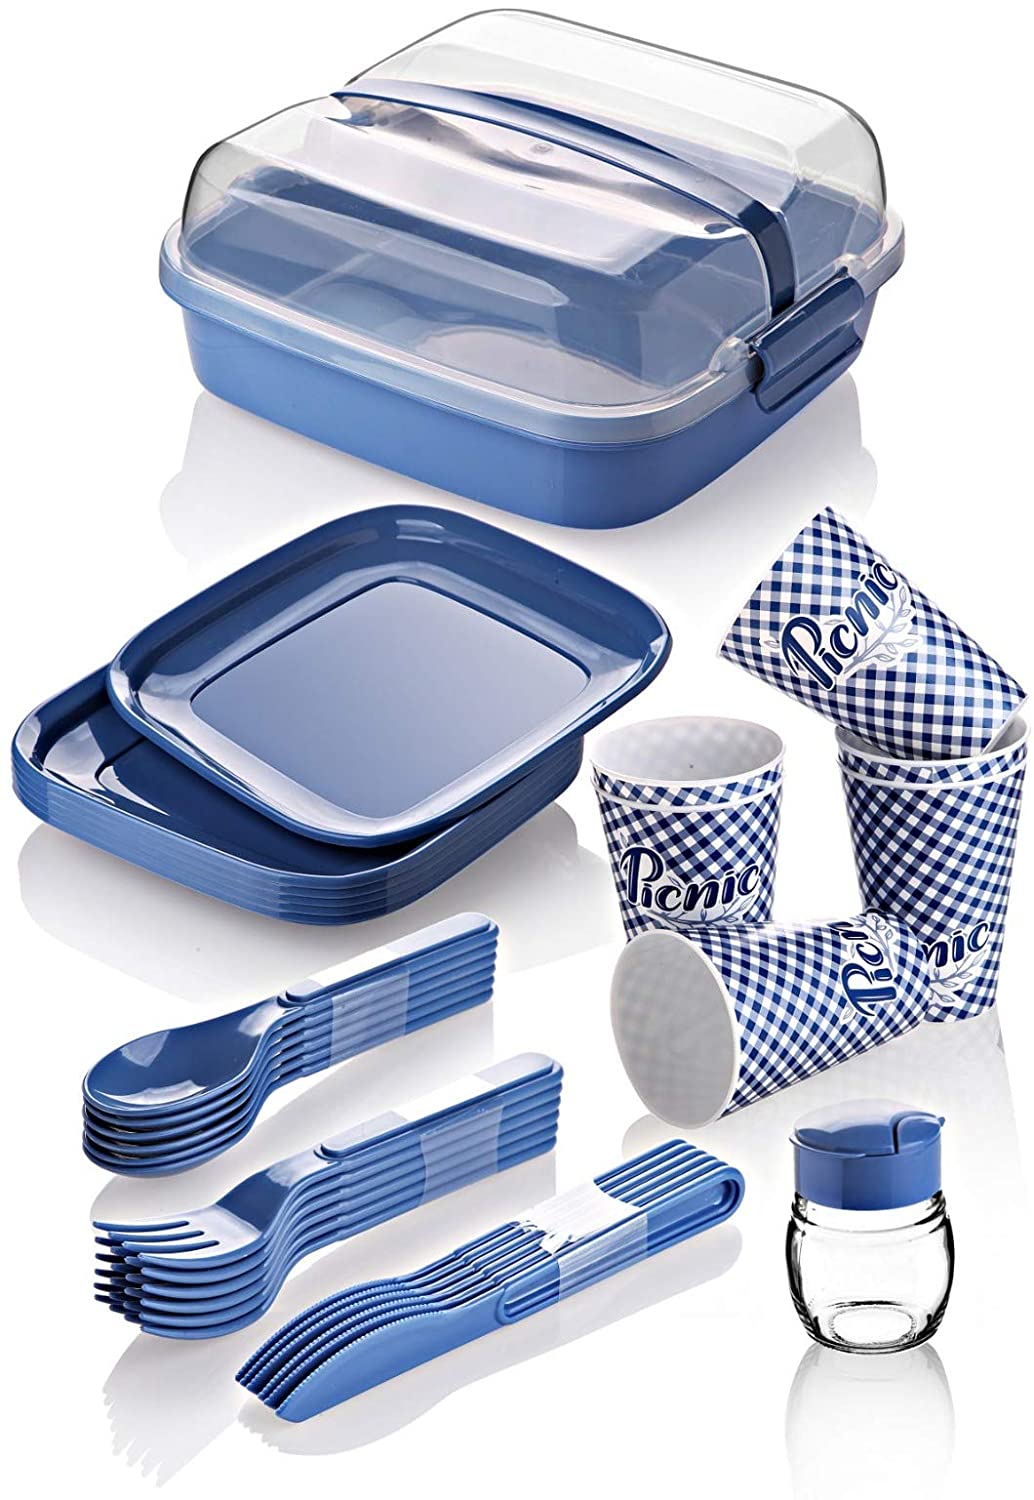 Plastic dining set for 6 persons